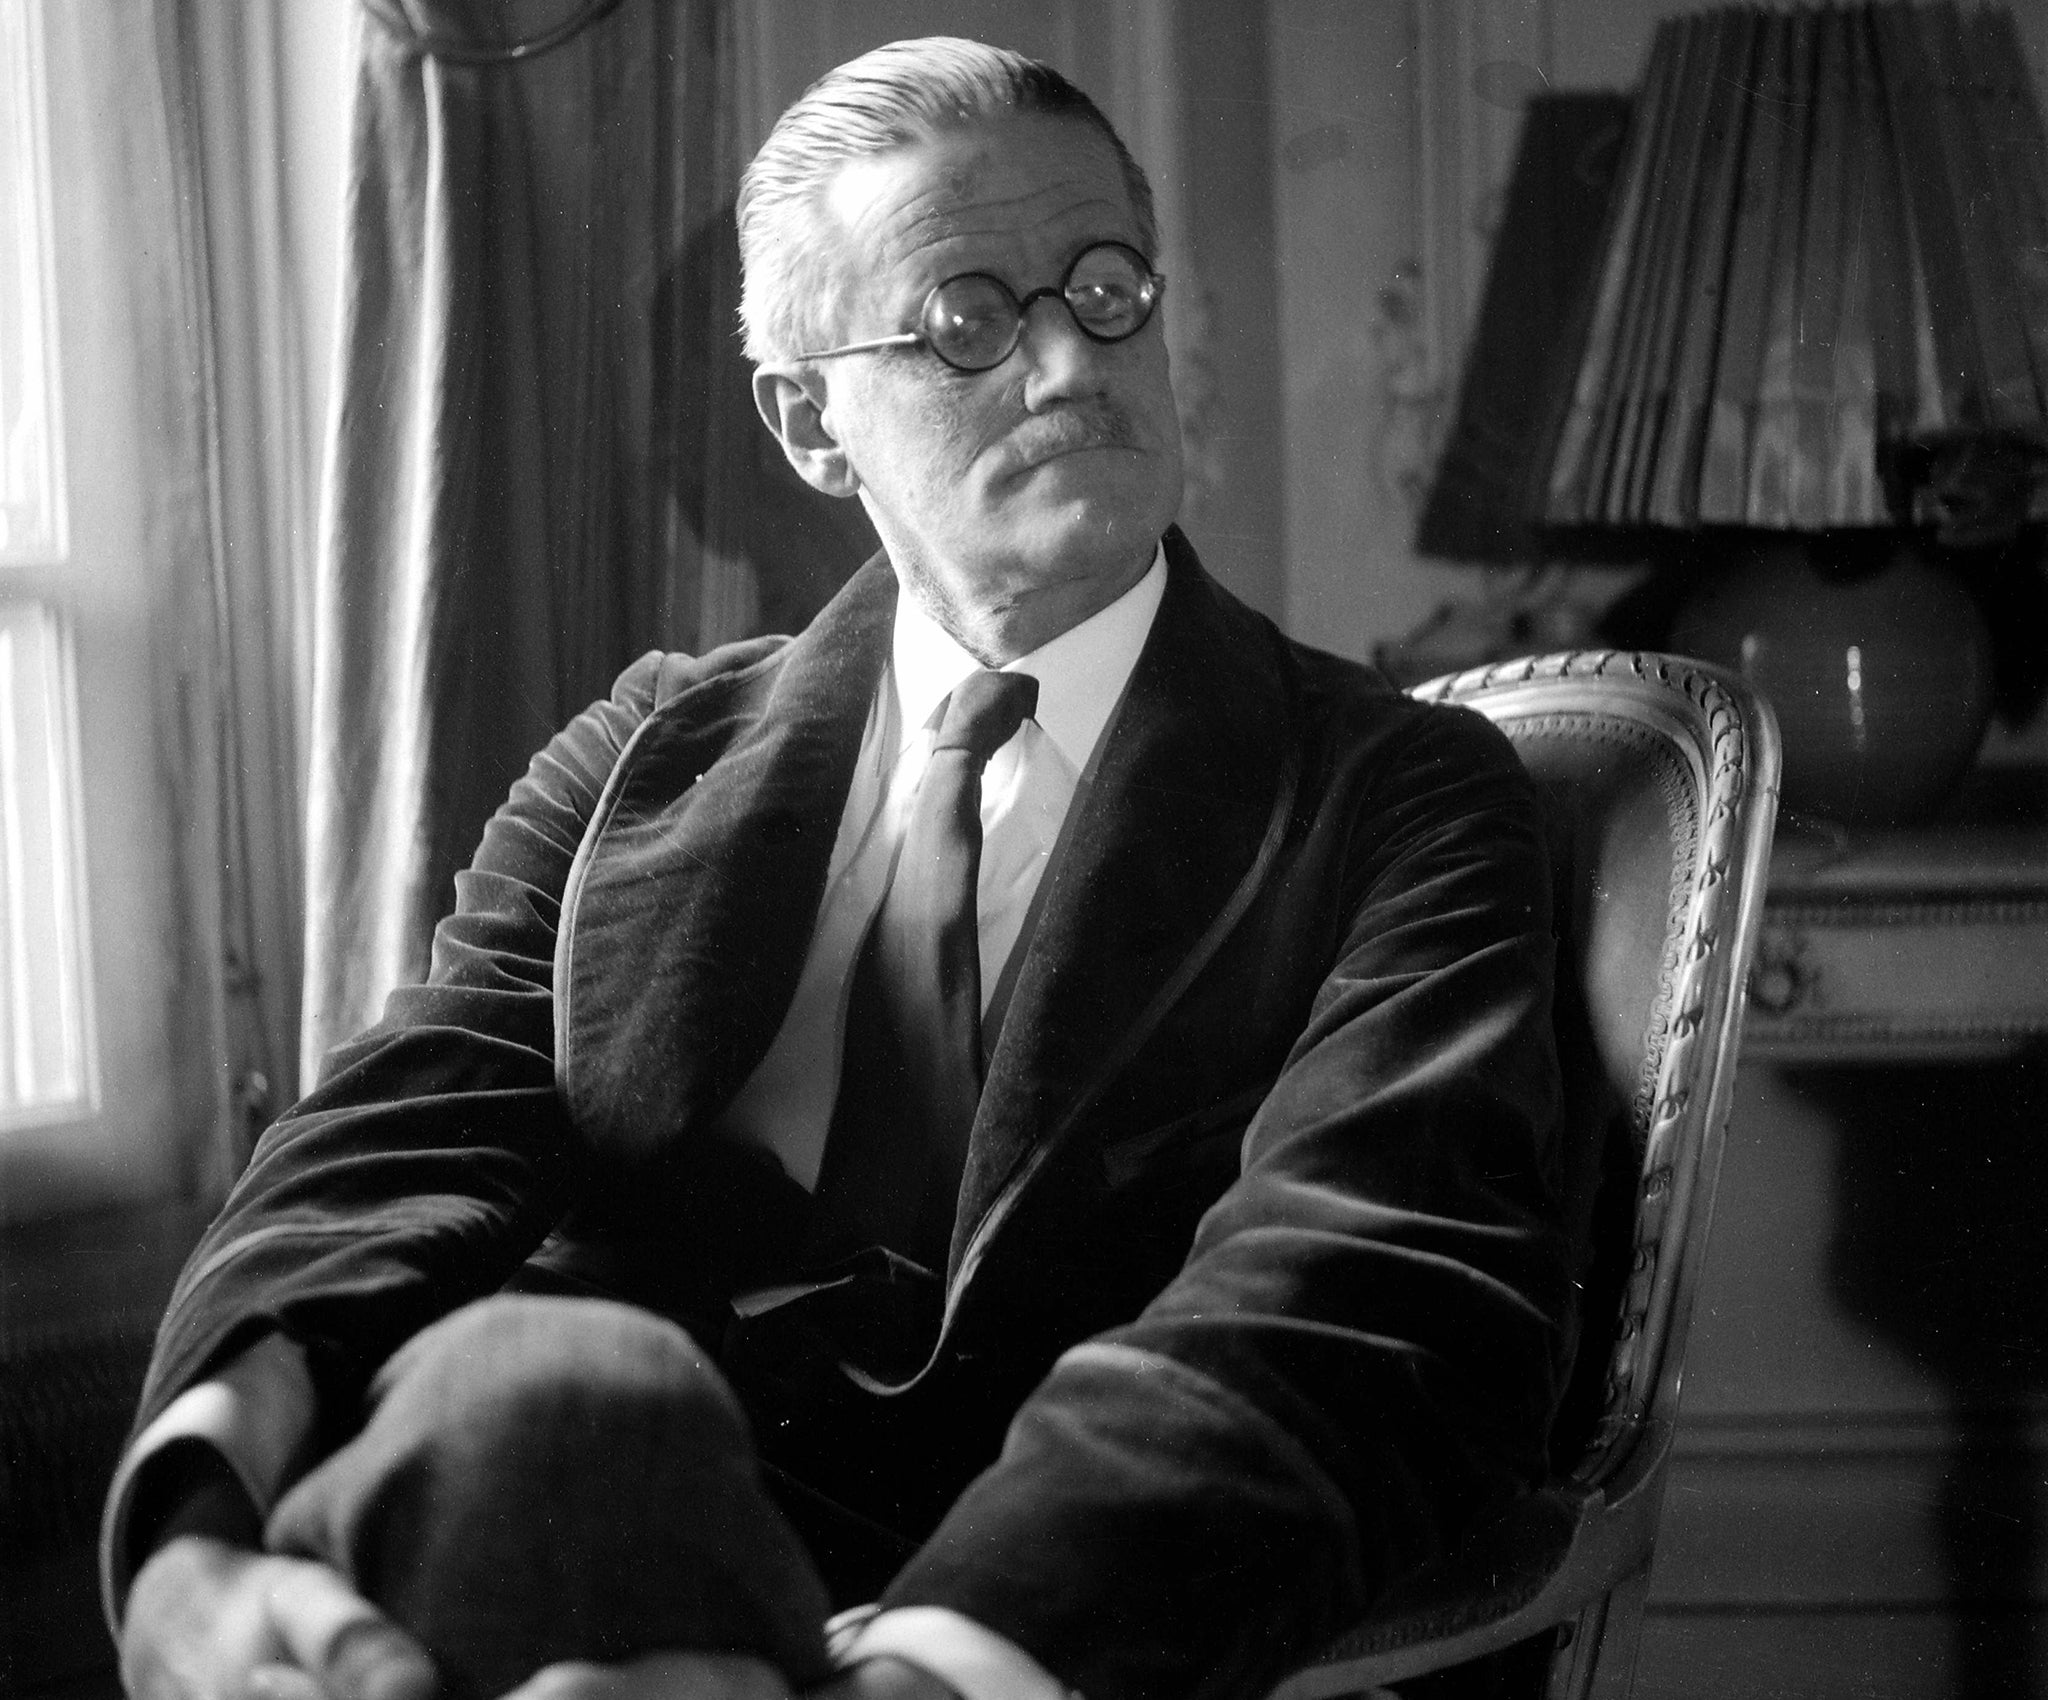 UNSPECIFIED - 1930:  James Joyce (1882-1941), Irish writer. LIP-5258-016  (Photo by Roger Viollet via Getty Images/Roger Viollet via Getty Images)